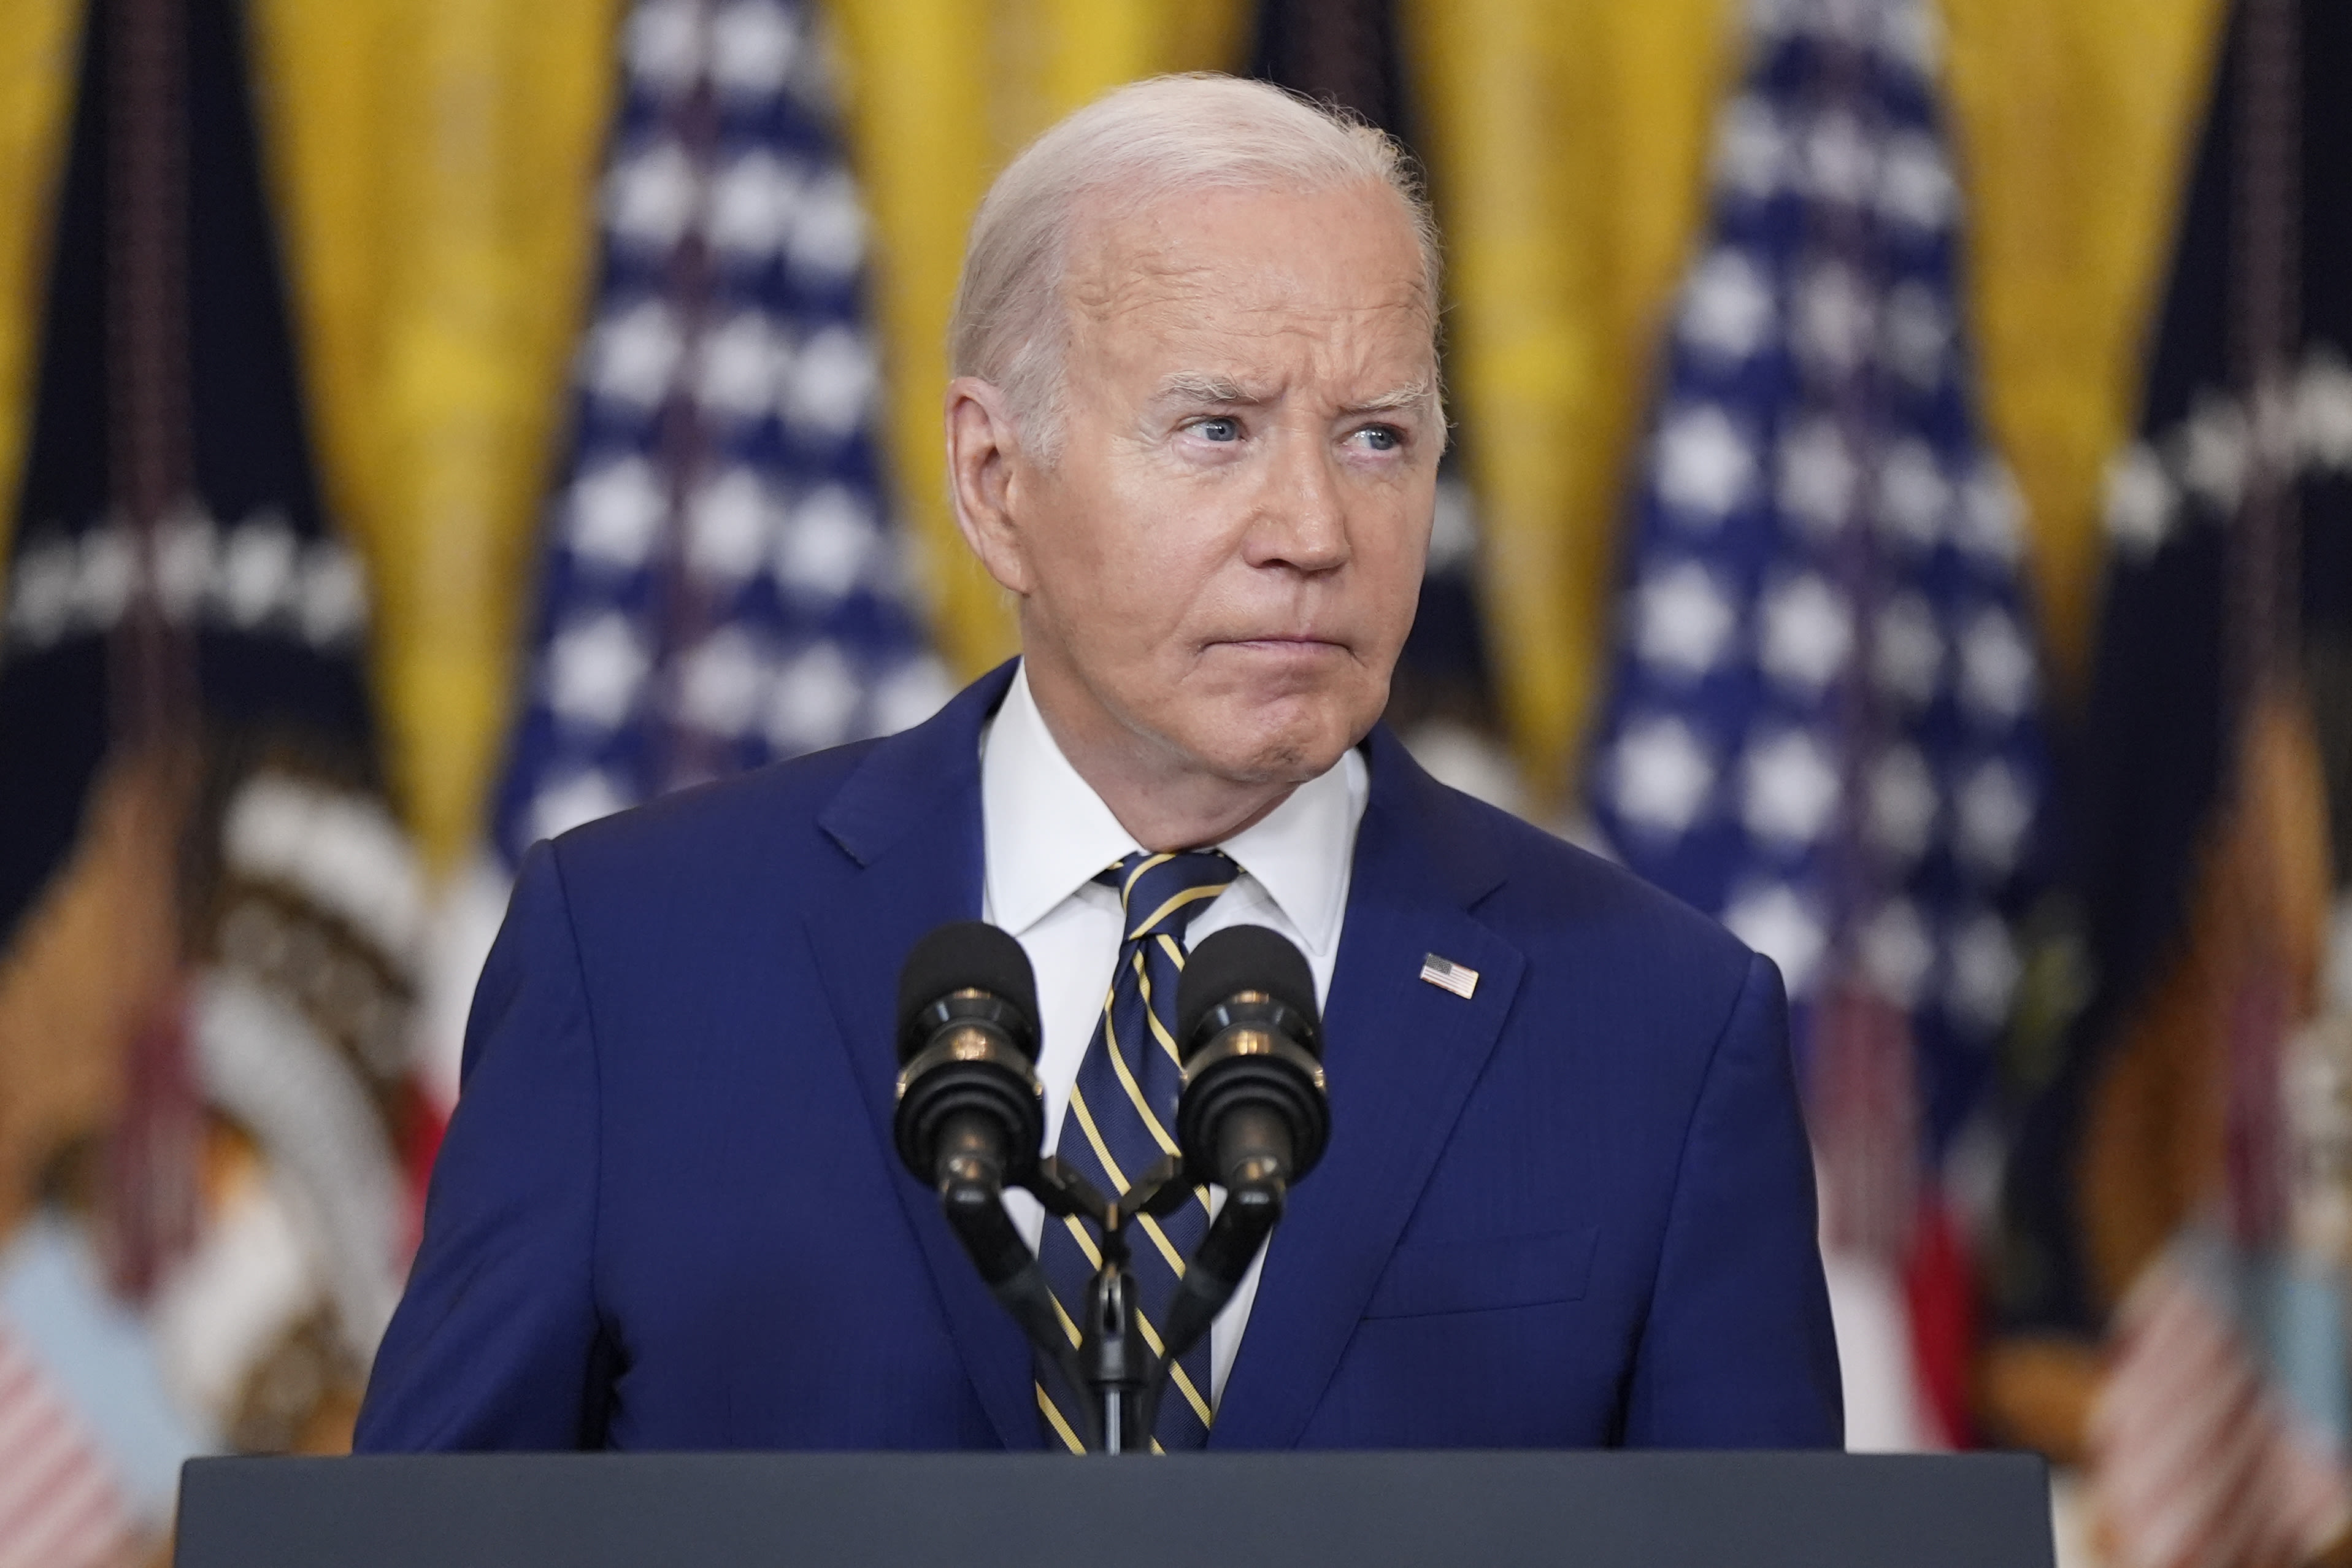 Biden took months to issue his border order. Now he and his team have to sell it.